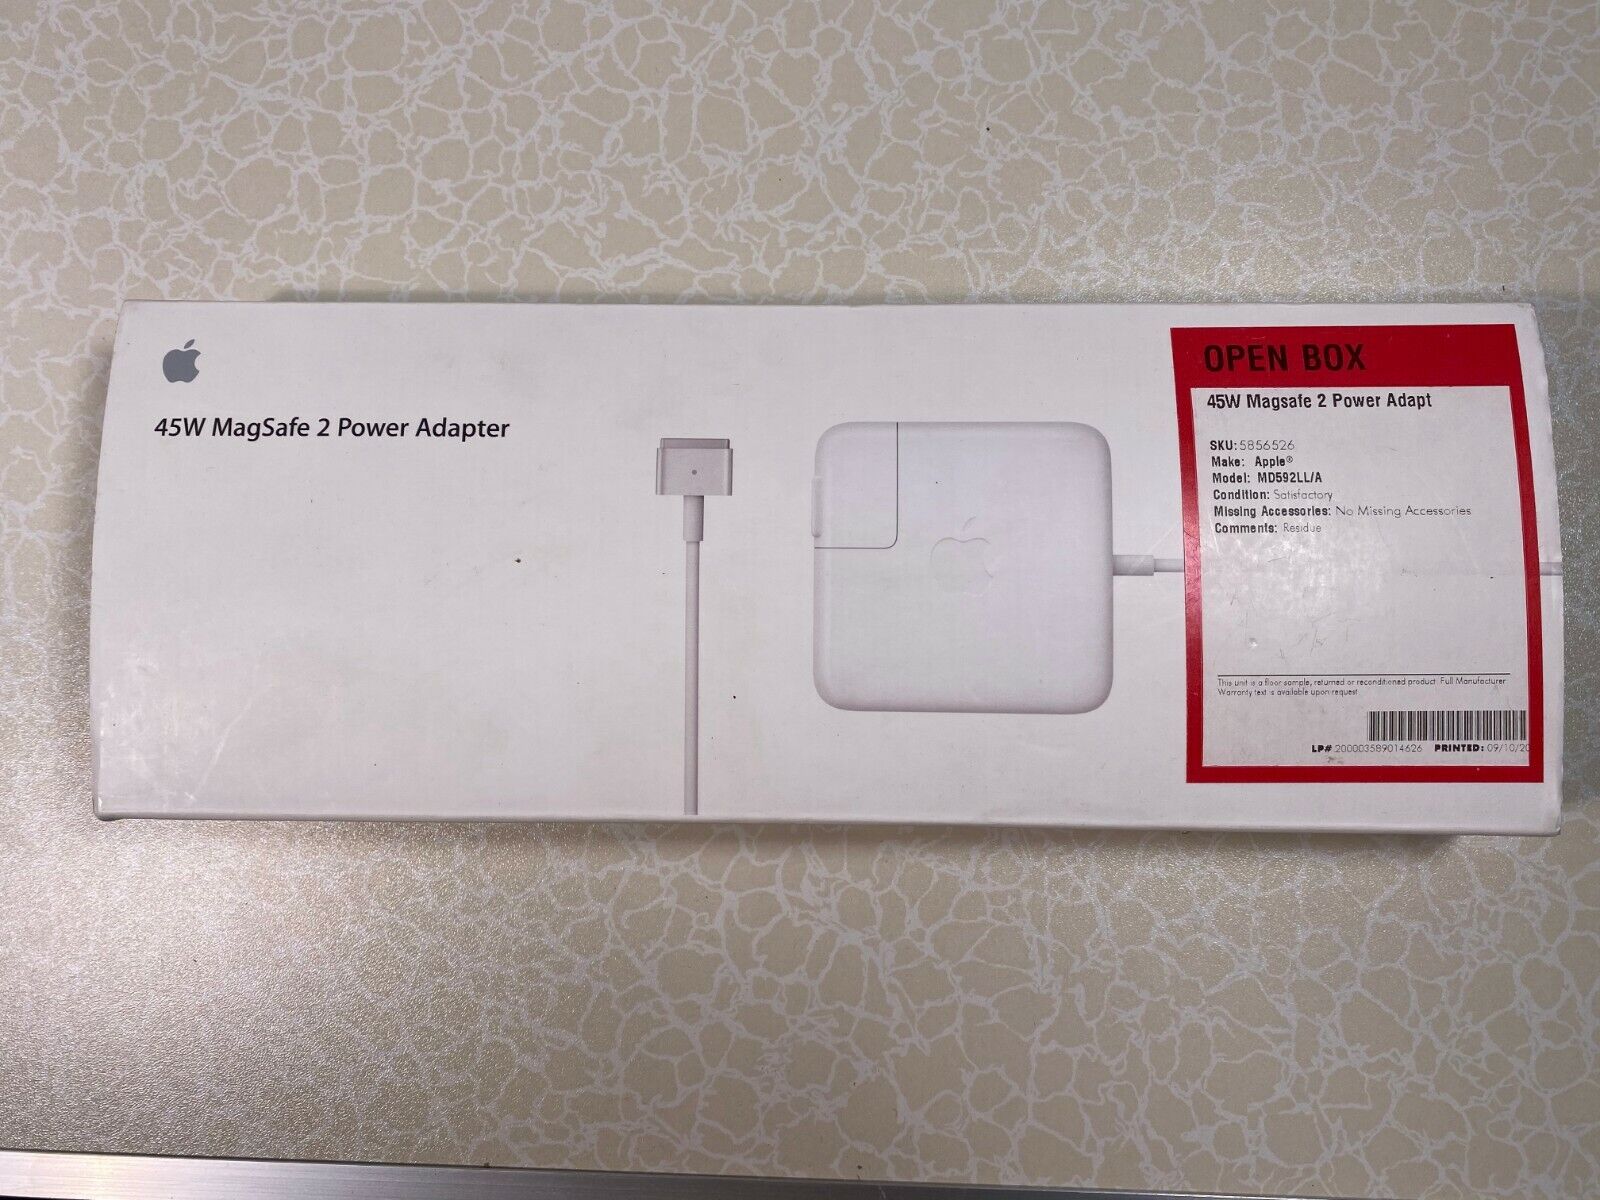 Apple MD592LL/A 45W MagSafe 2 Power Adapter Charger Genuine OEM A1436 - NEW OPEN